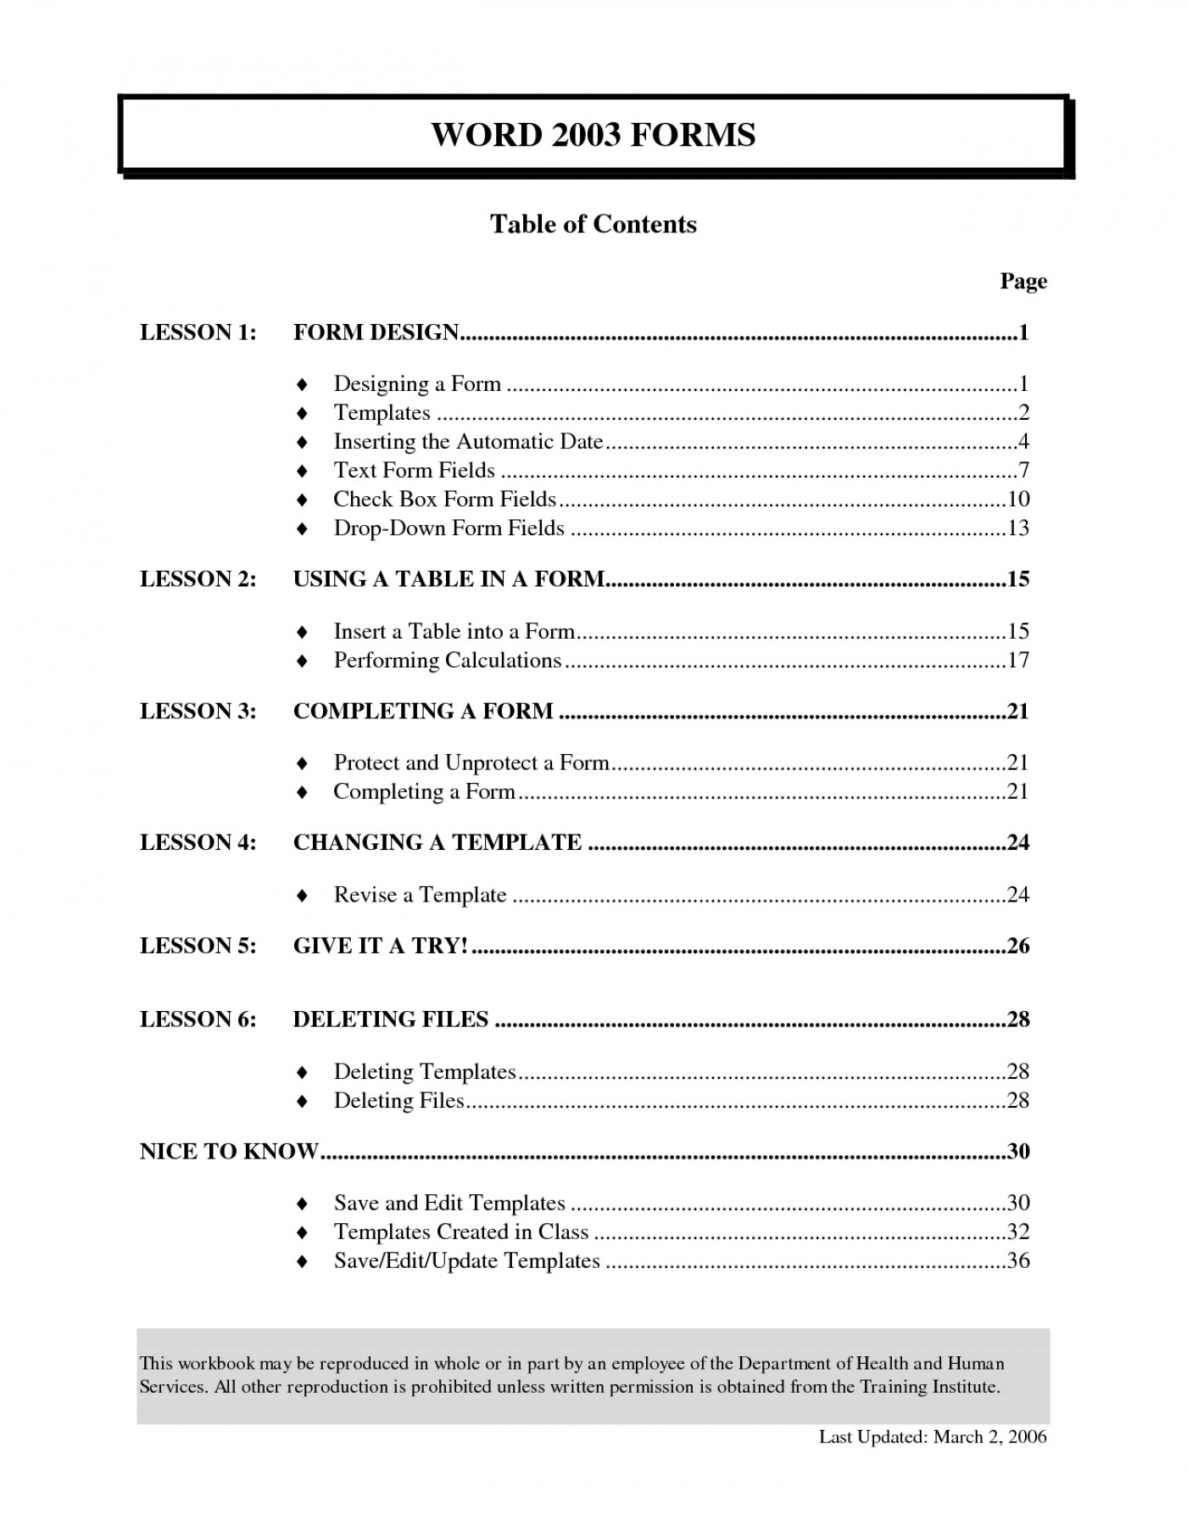 Table Of Contents Template Word